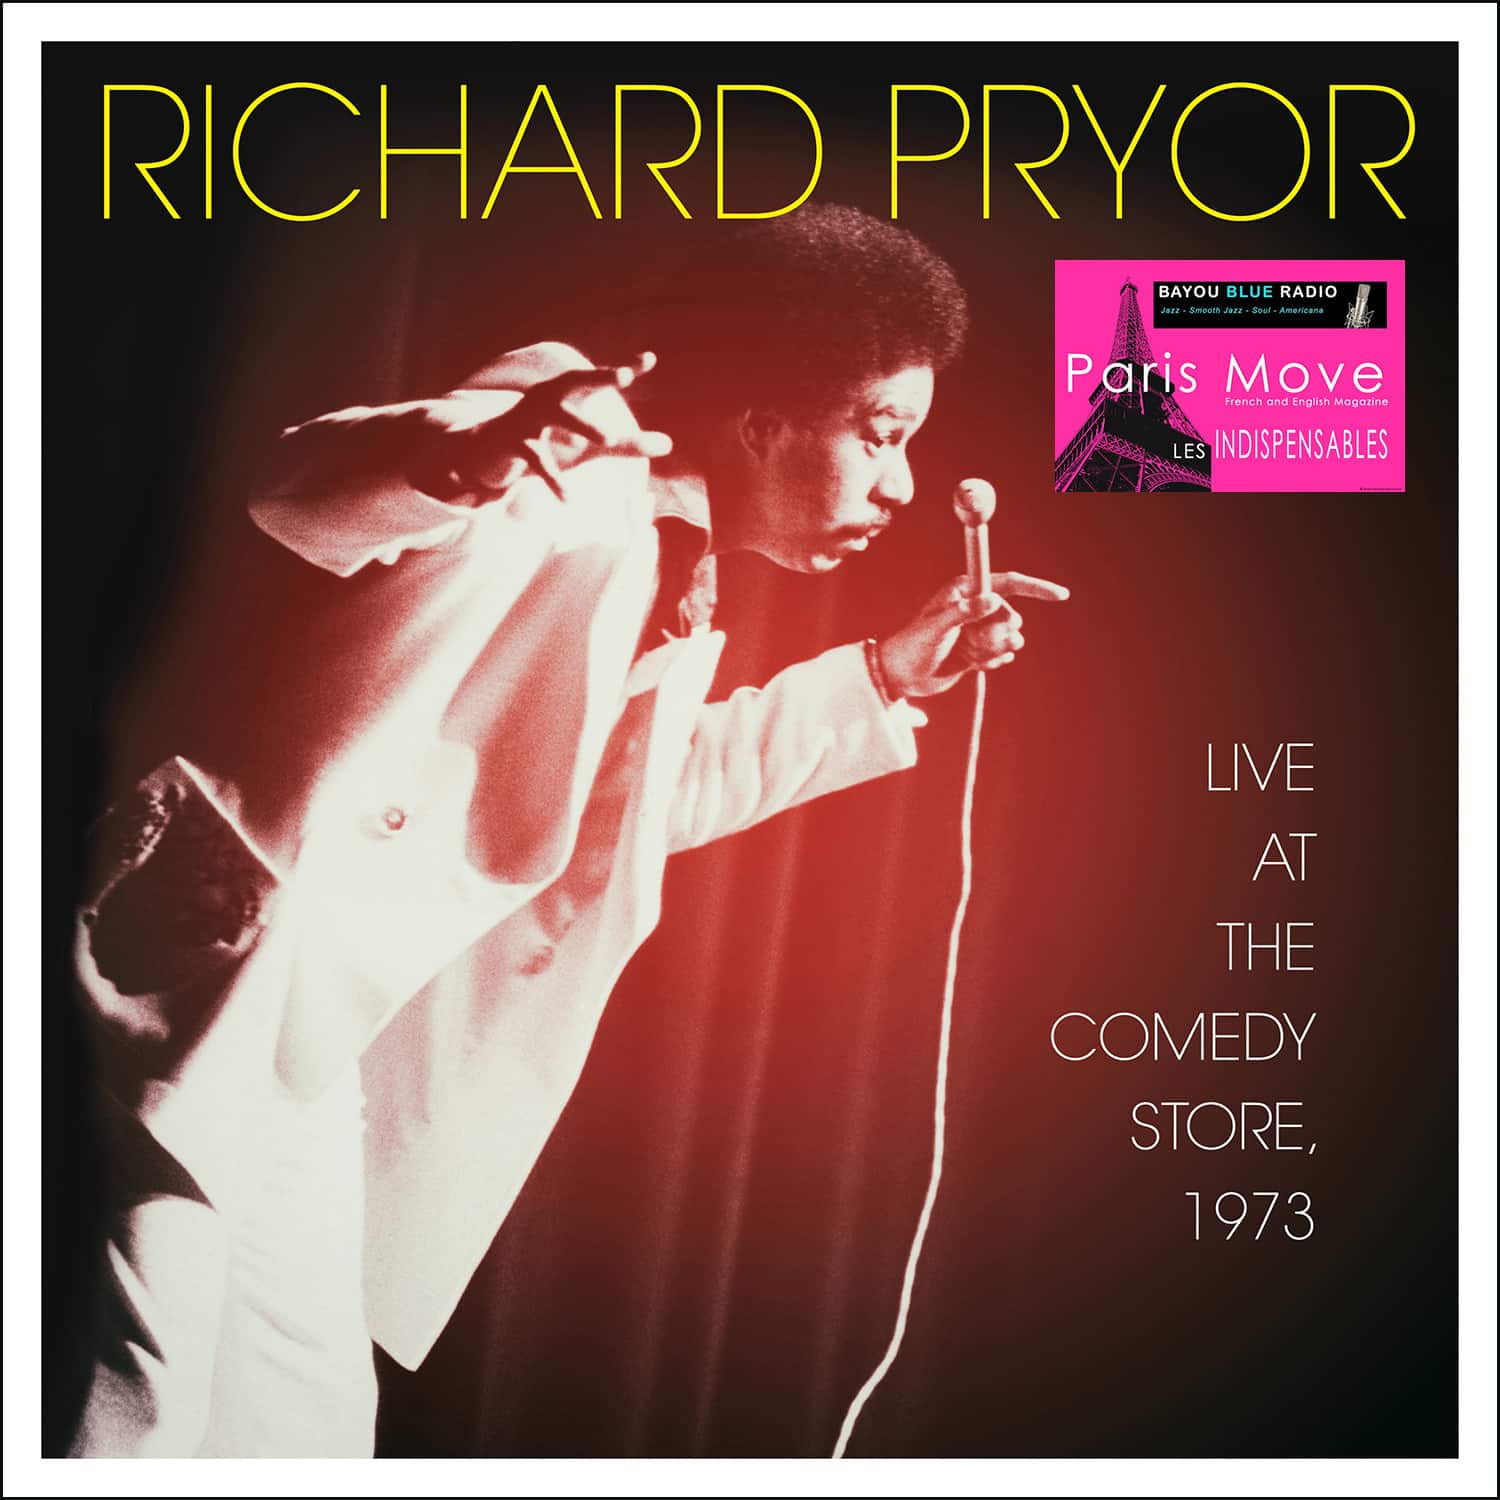 RICHARD PRYOR’S LIVE AT THE COMEDY STORE, 1973